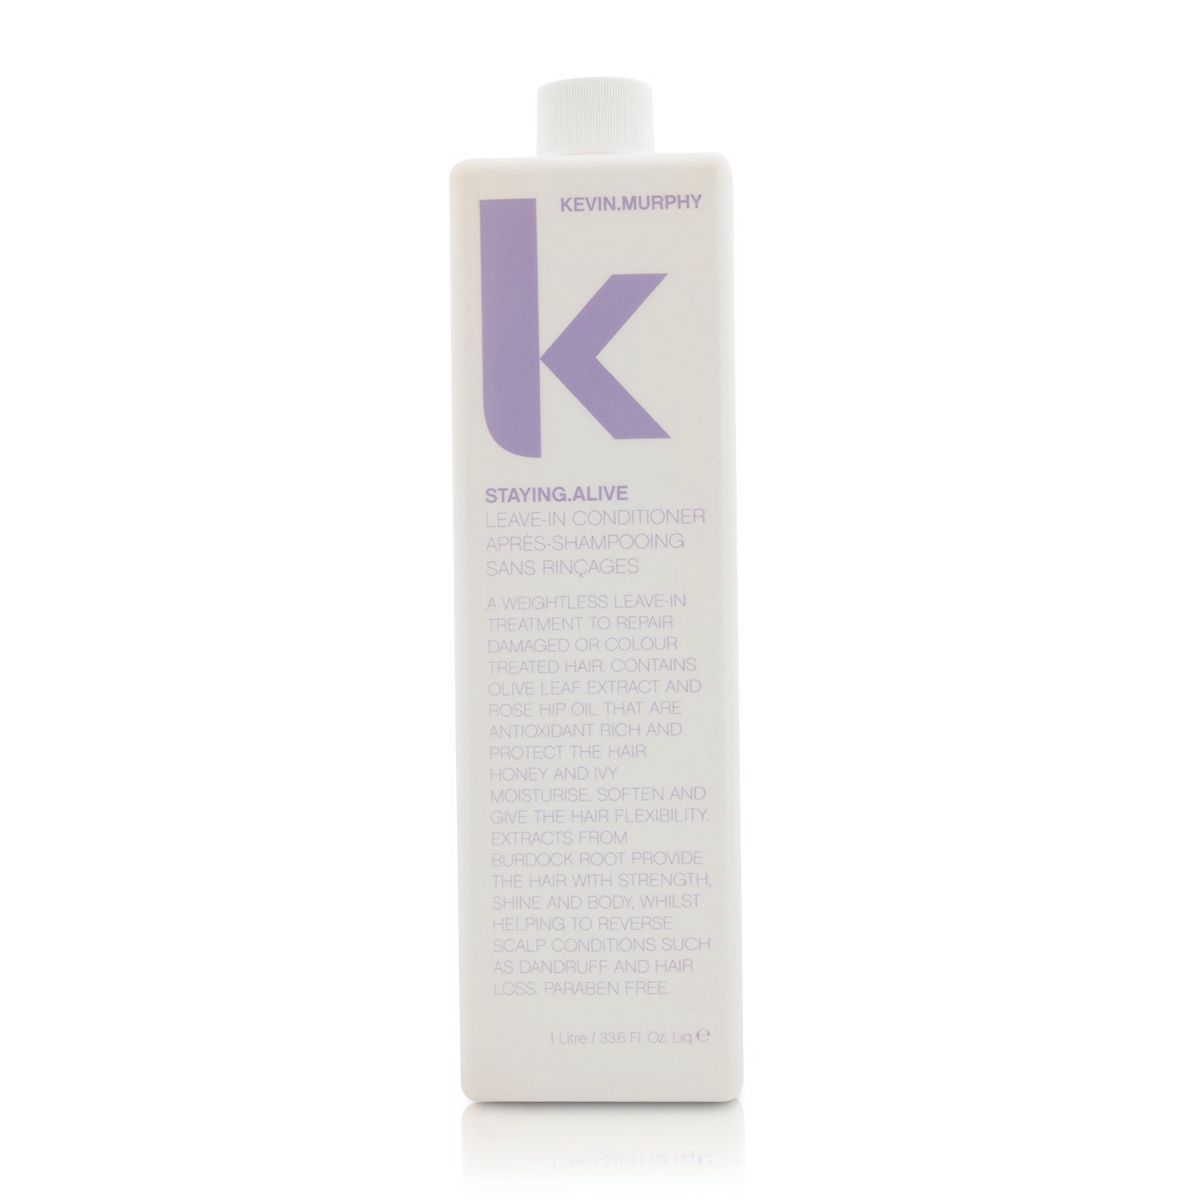 Staying.Alive Leave-In Treatment Kevin.Murphy Image